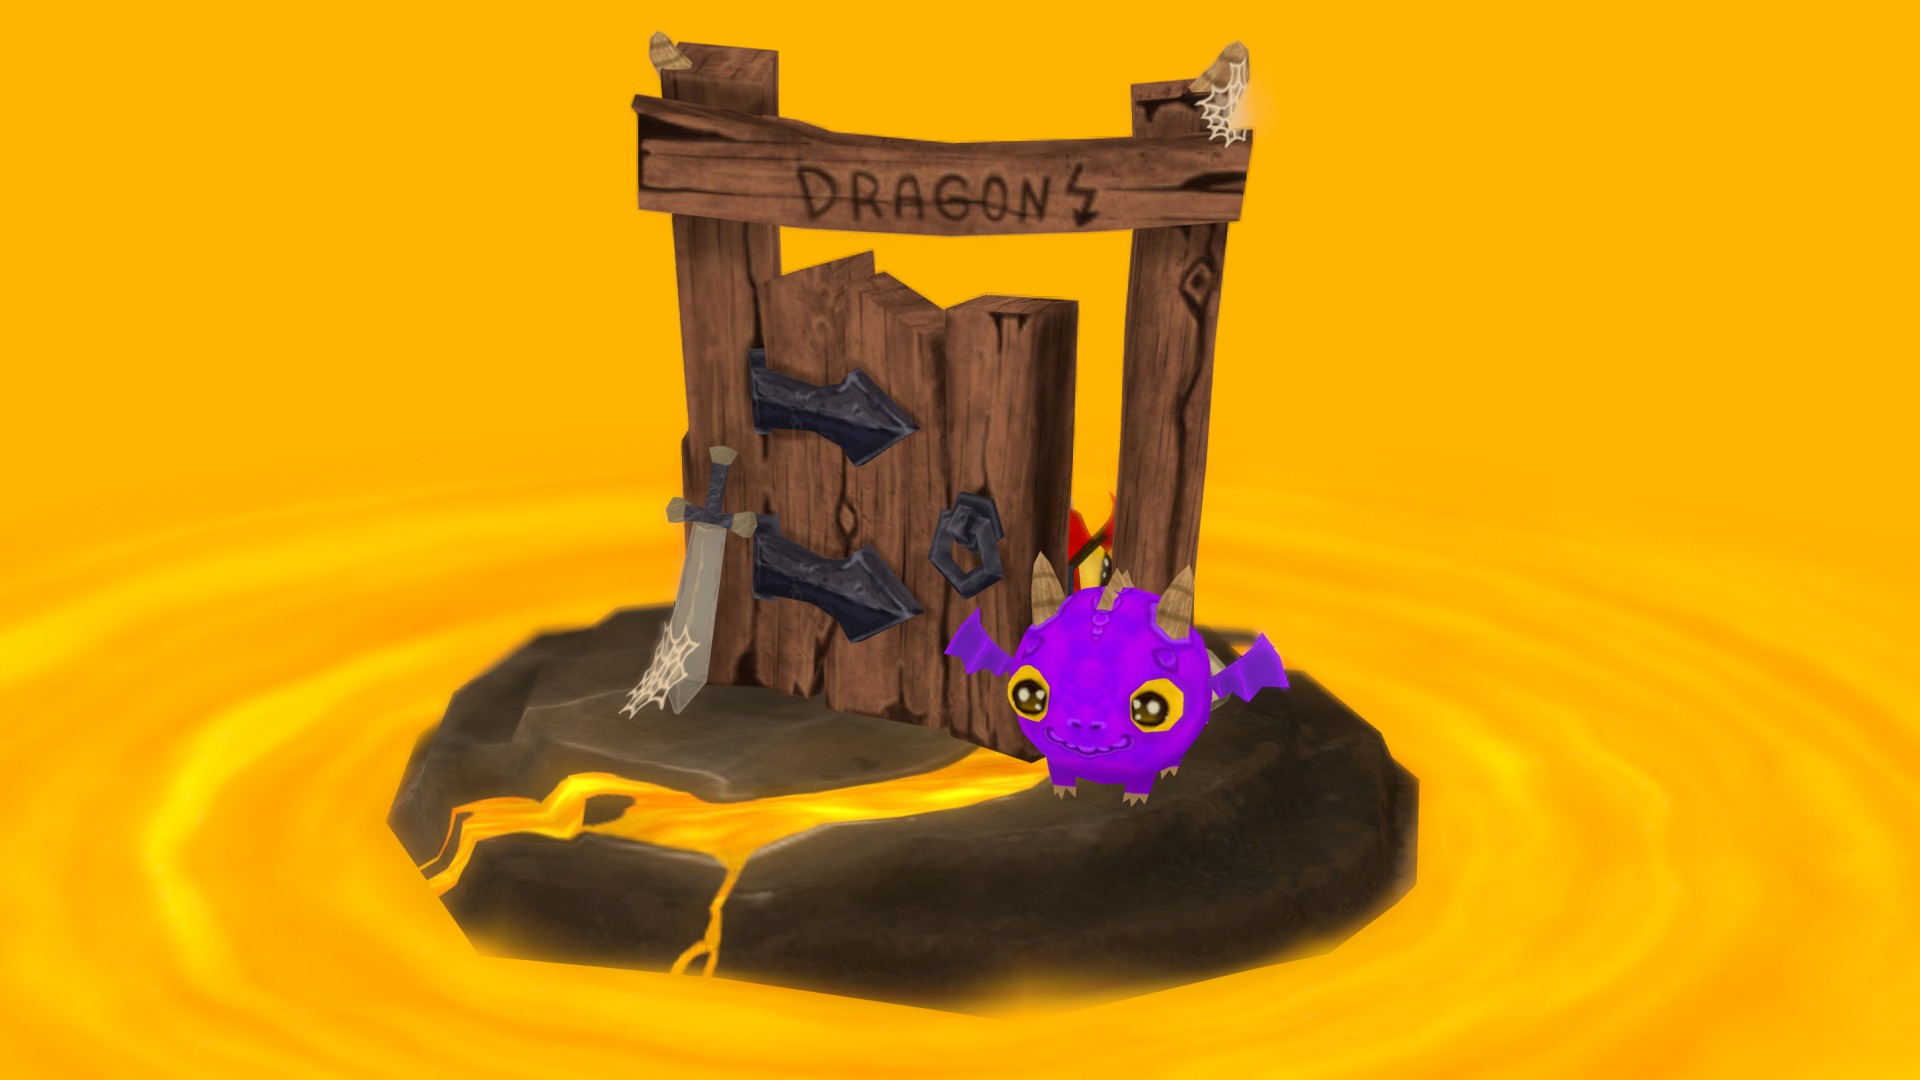 3D model Dragons Door - This is a 3D model of the Dragons Door. The 3D model is about a cat toy on a yellow background.